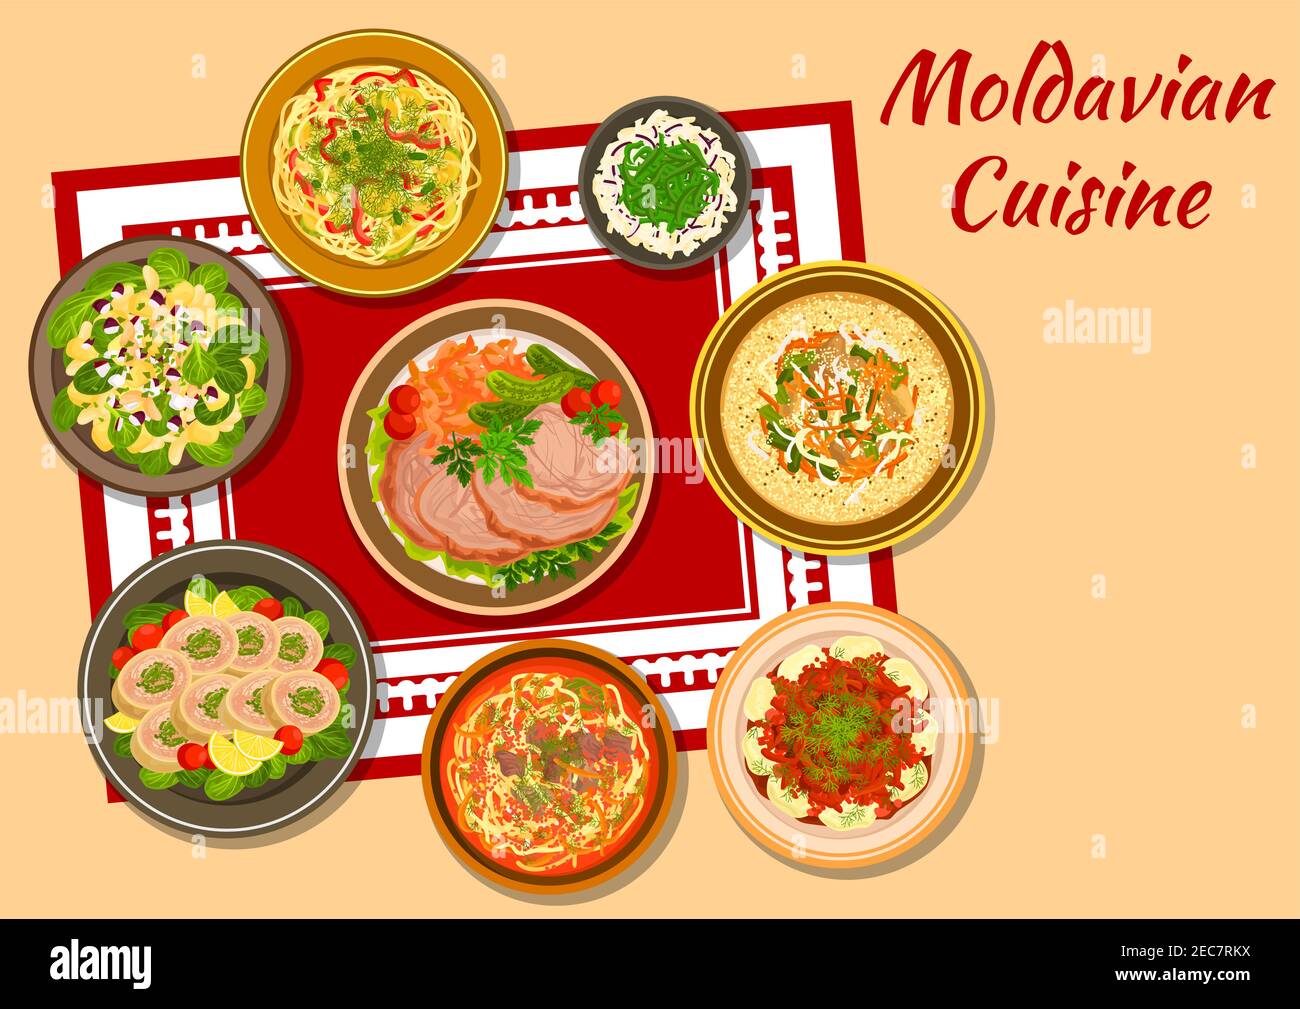 Moldavian cuisine dinner sign with dumplings with chicken stew, baked pork with pickles, goose noodle soup, stuffed chicken roll, potato salad, chicke Stock Vector